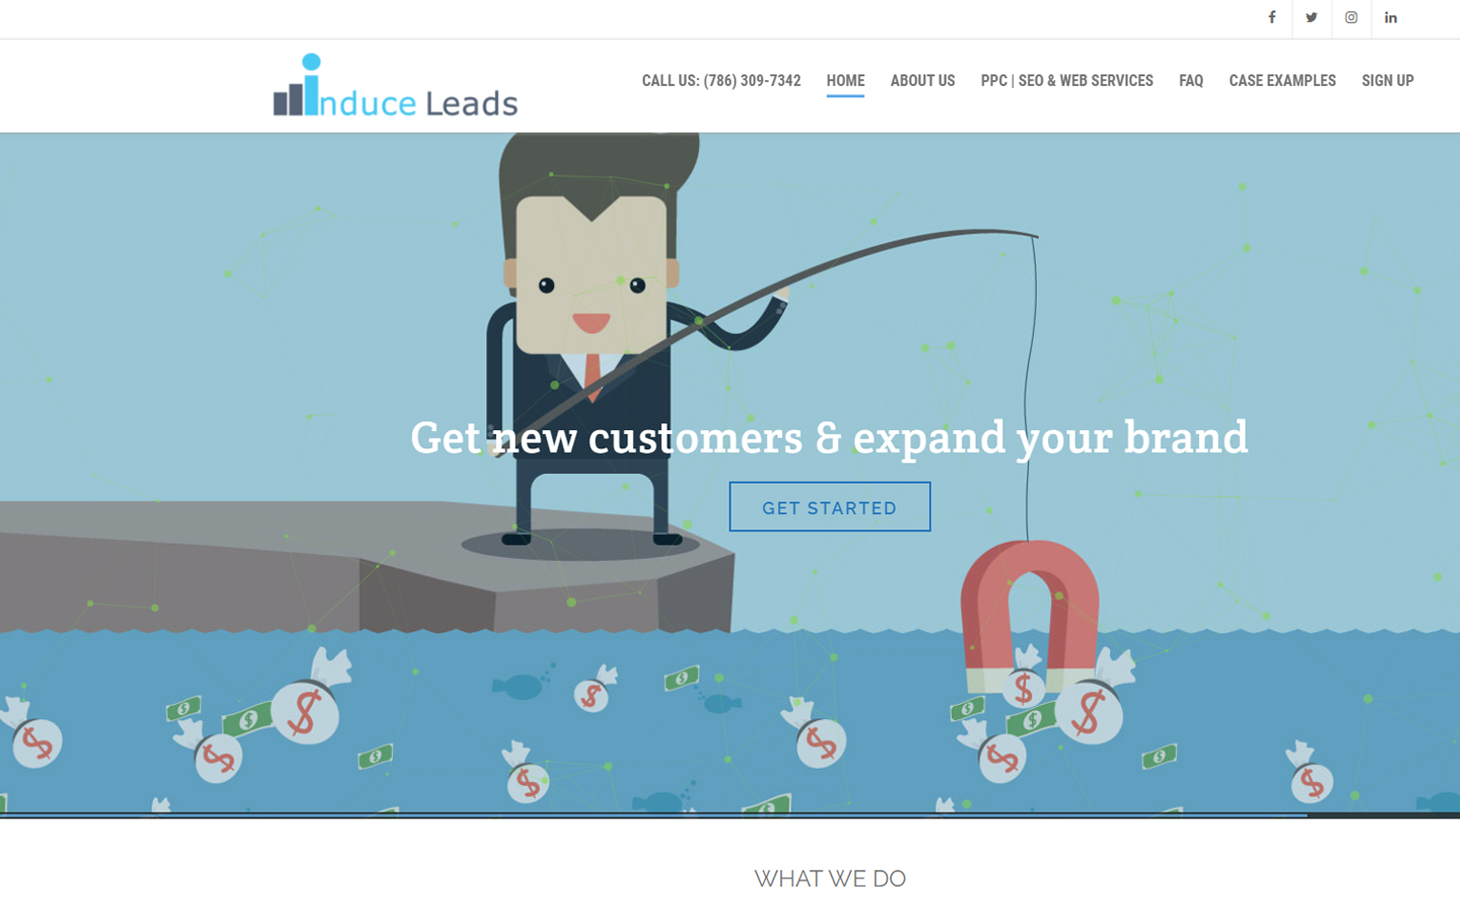 Induce Leads